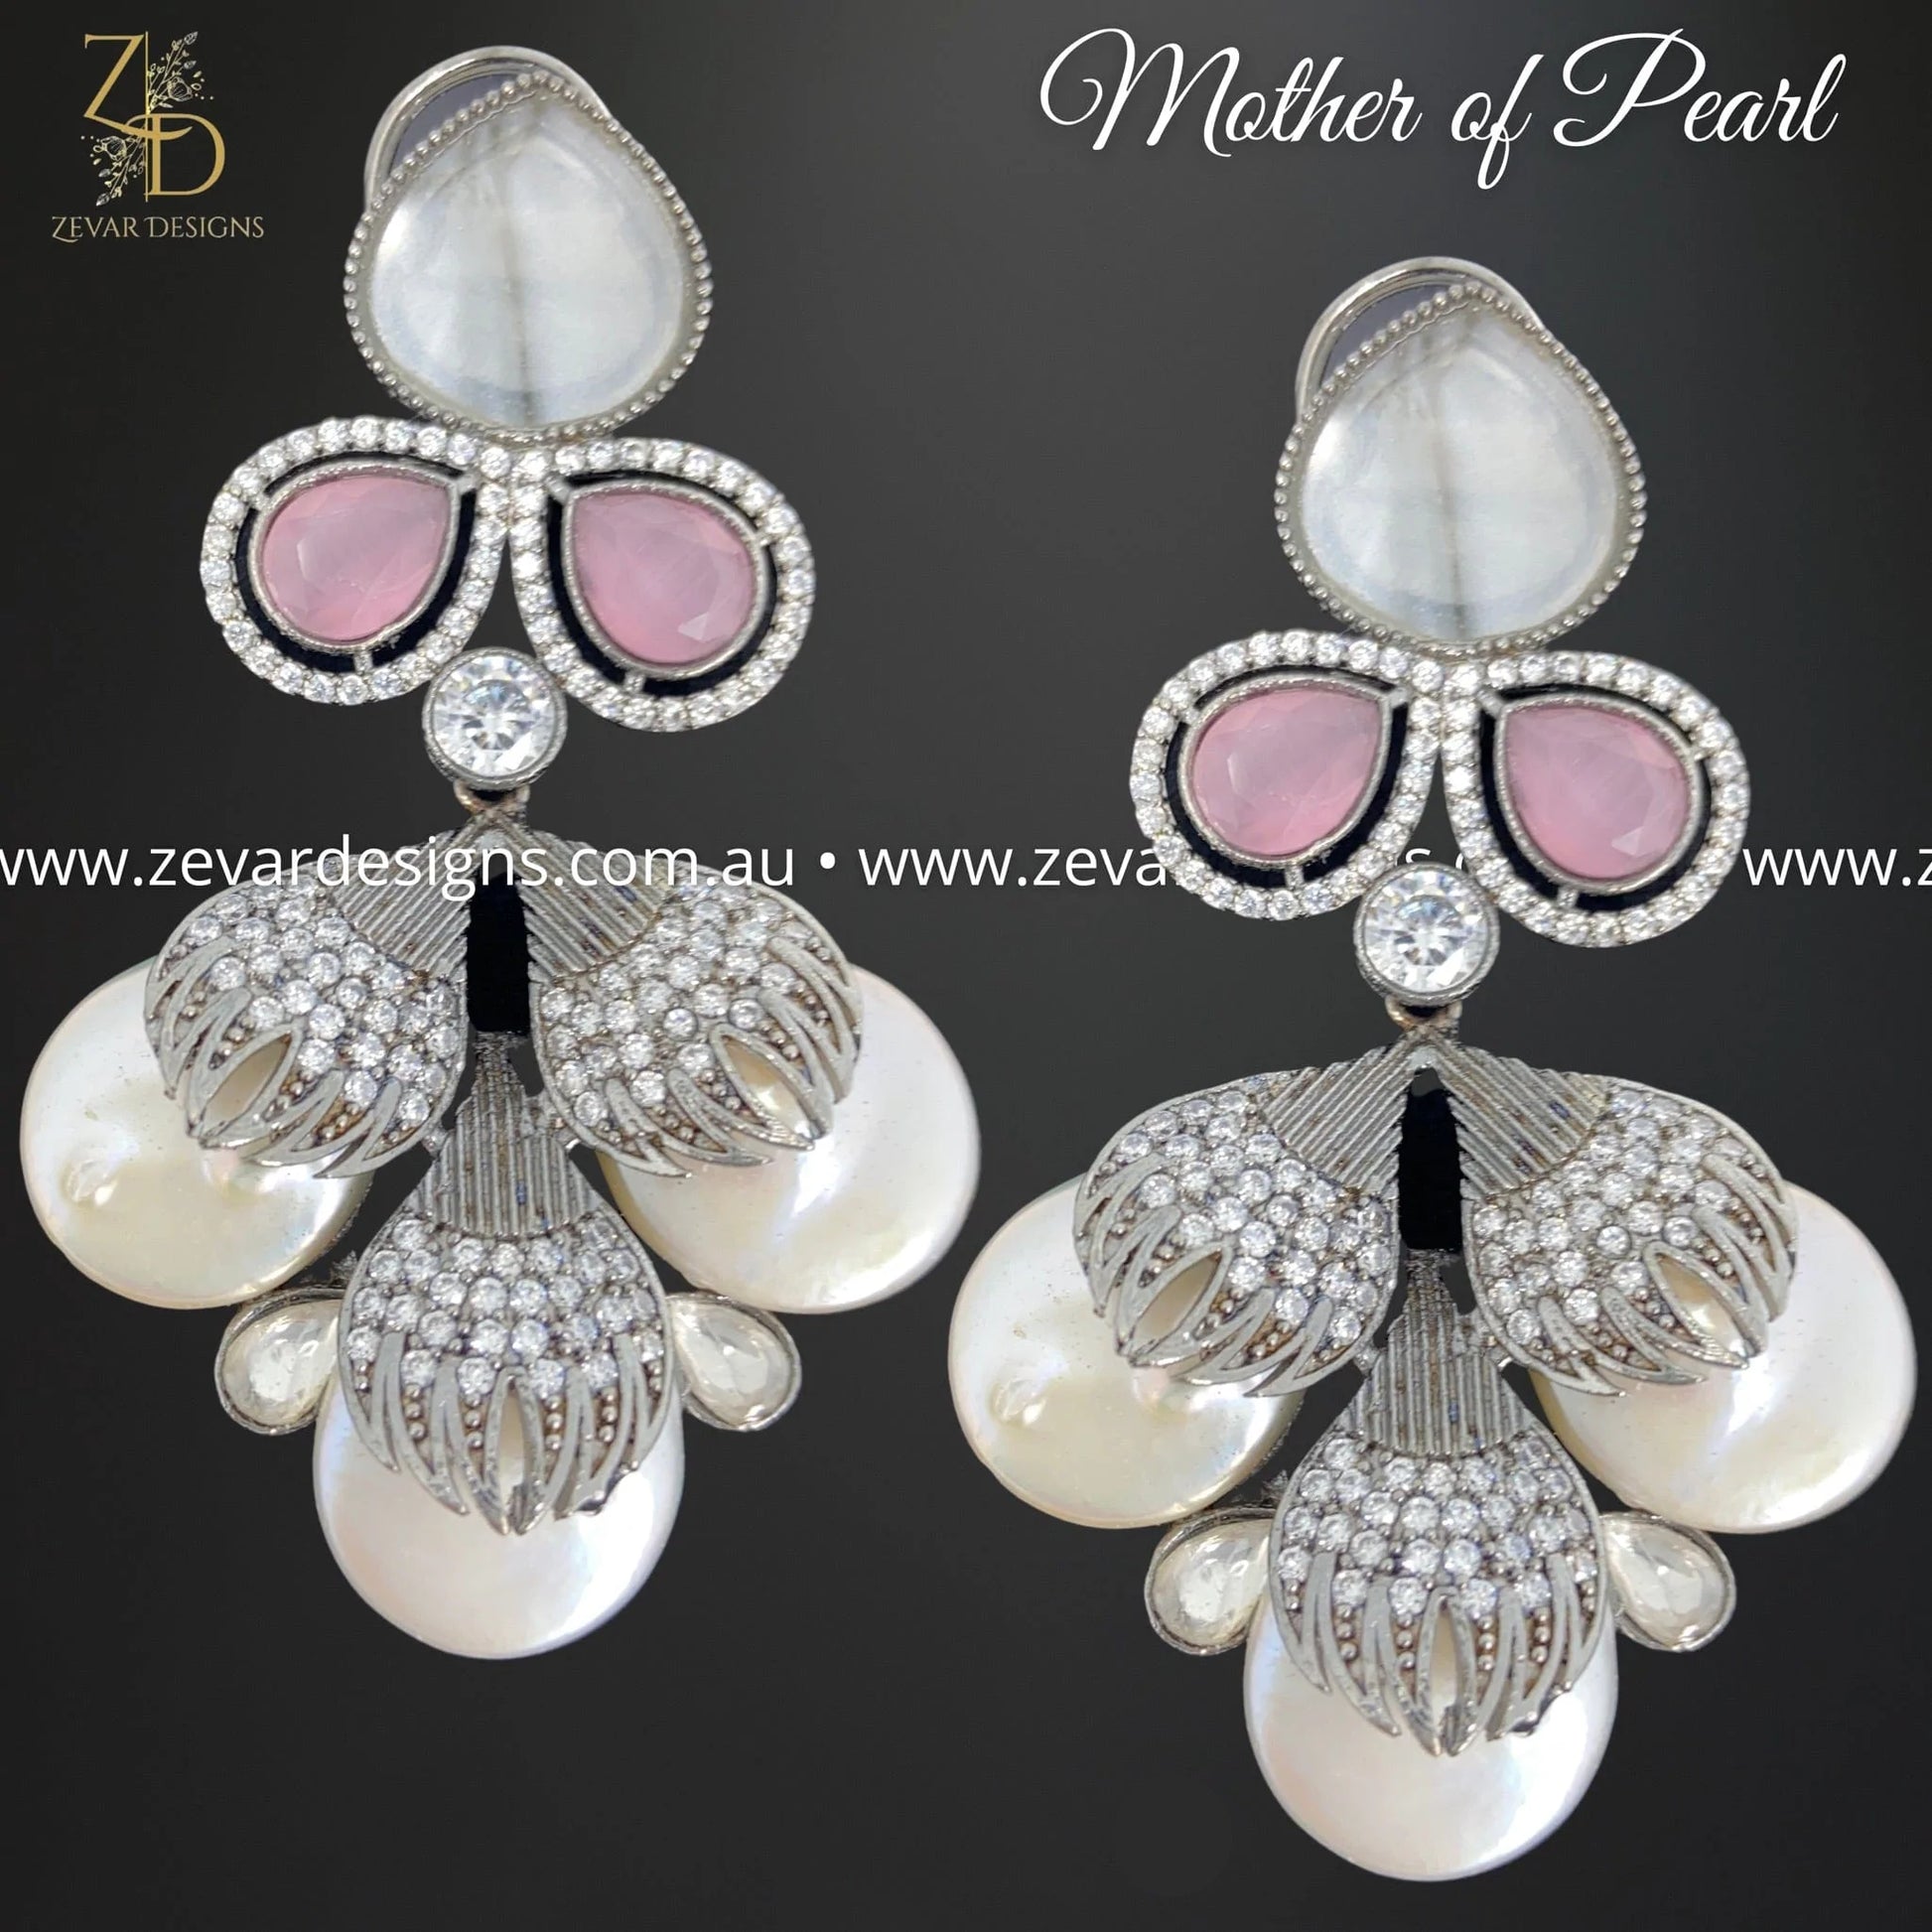 Zevar Designs Fusion-Amrapali Kundan AD Earrings with Mother of Pearl - Pink